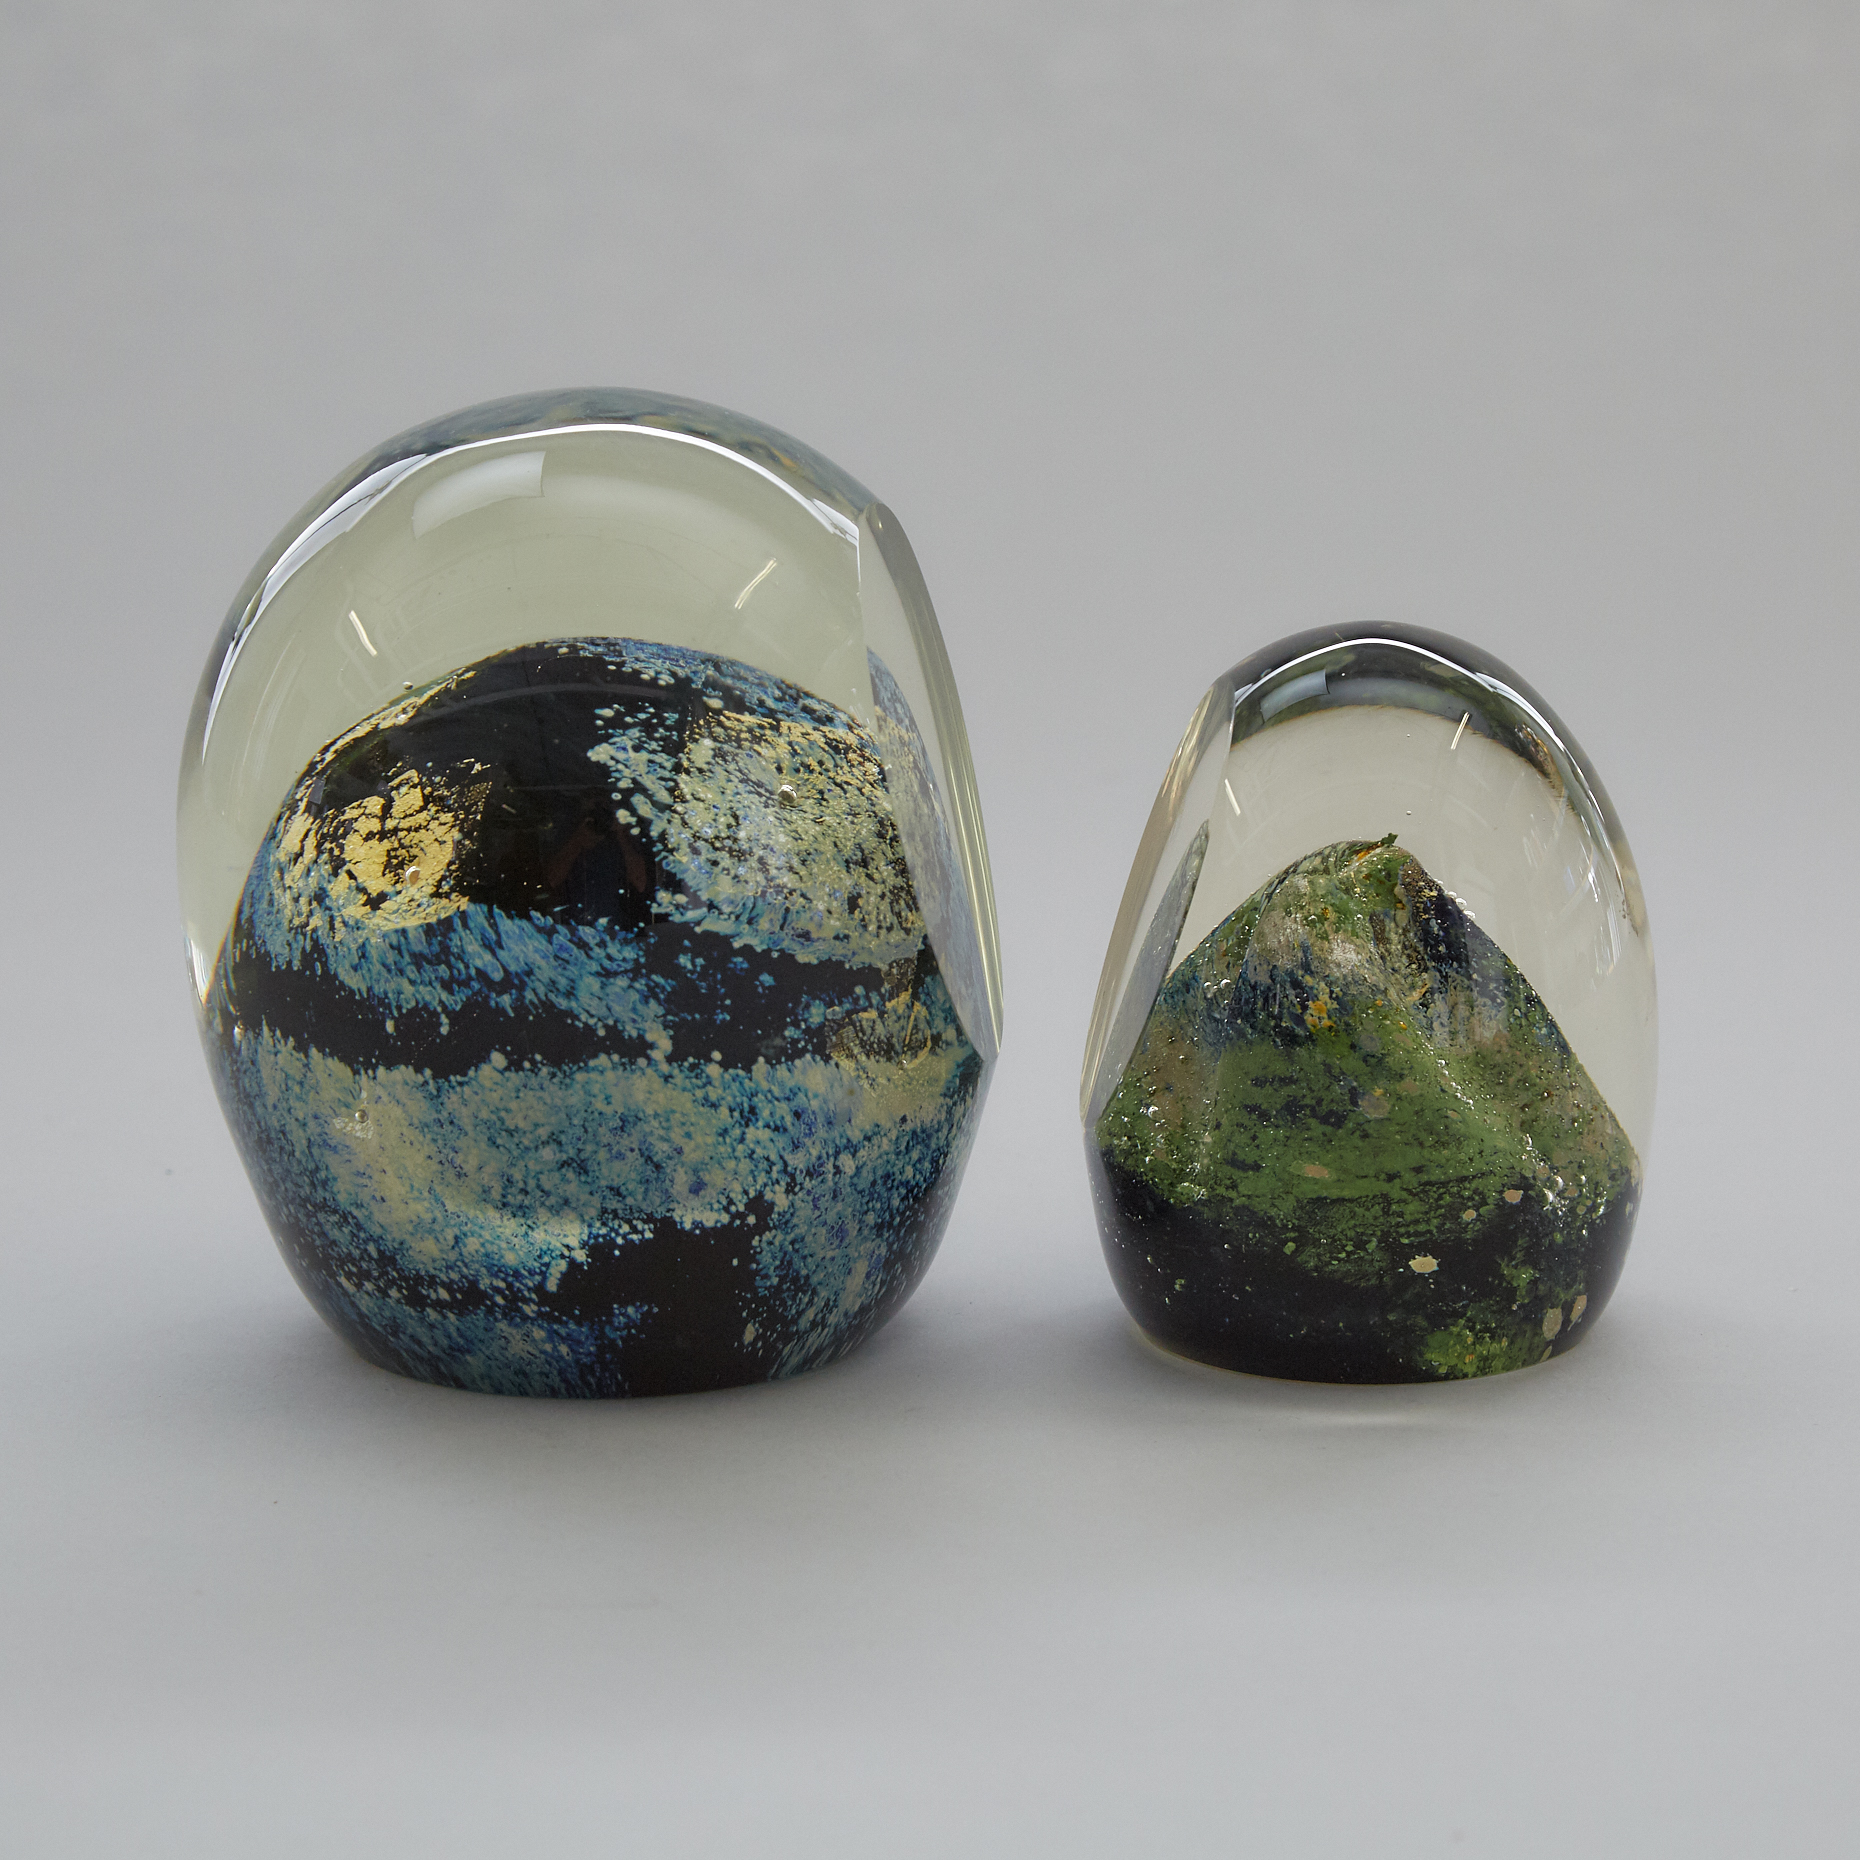 Toan Klein (American/Canadian, b.1949), Two Internally Decorated Glass Paperweights, 1977/81